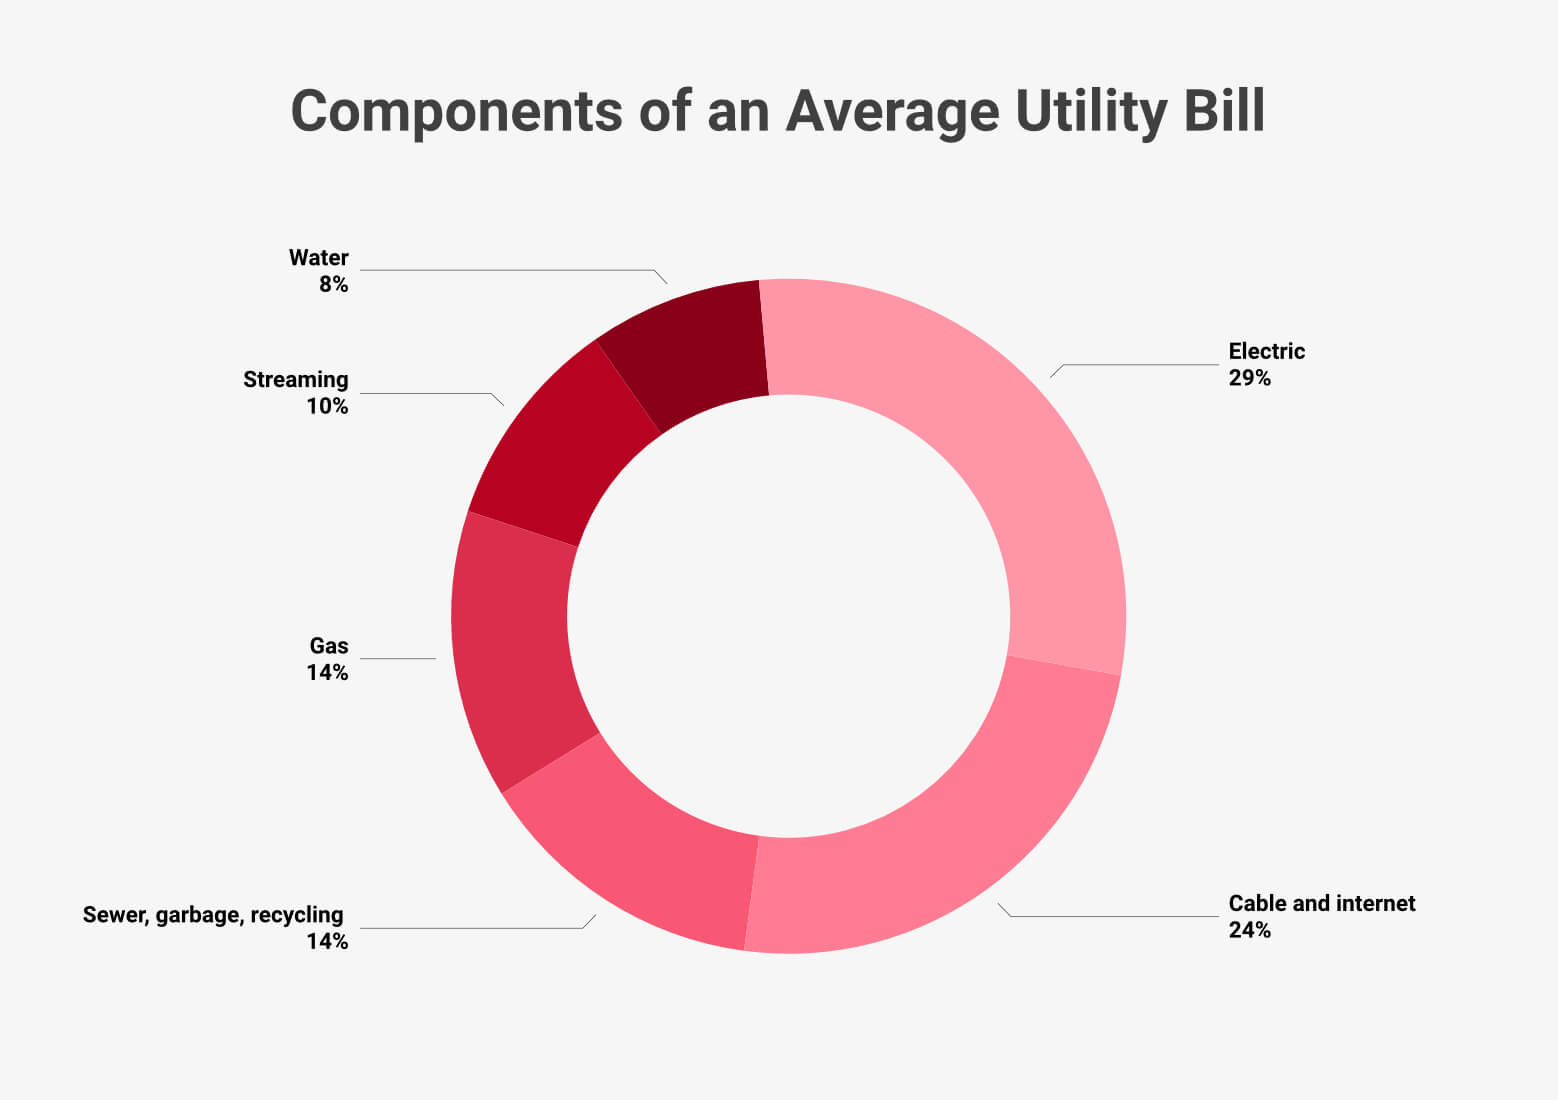 Components of an Average Utility Bill